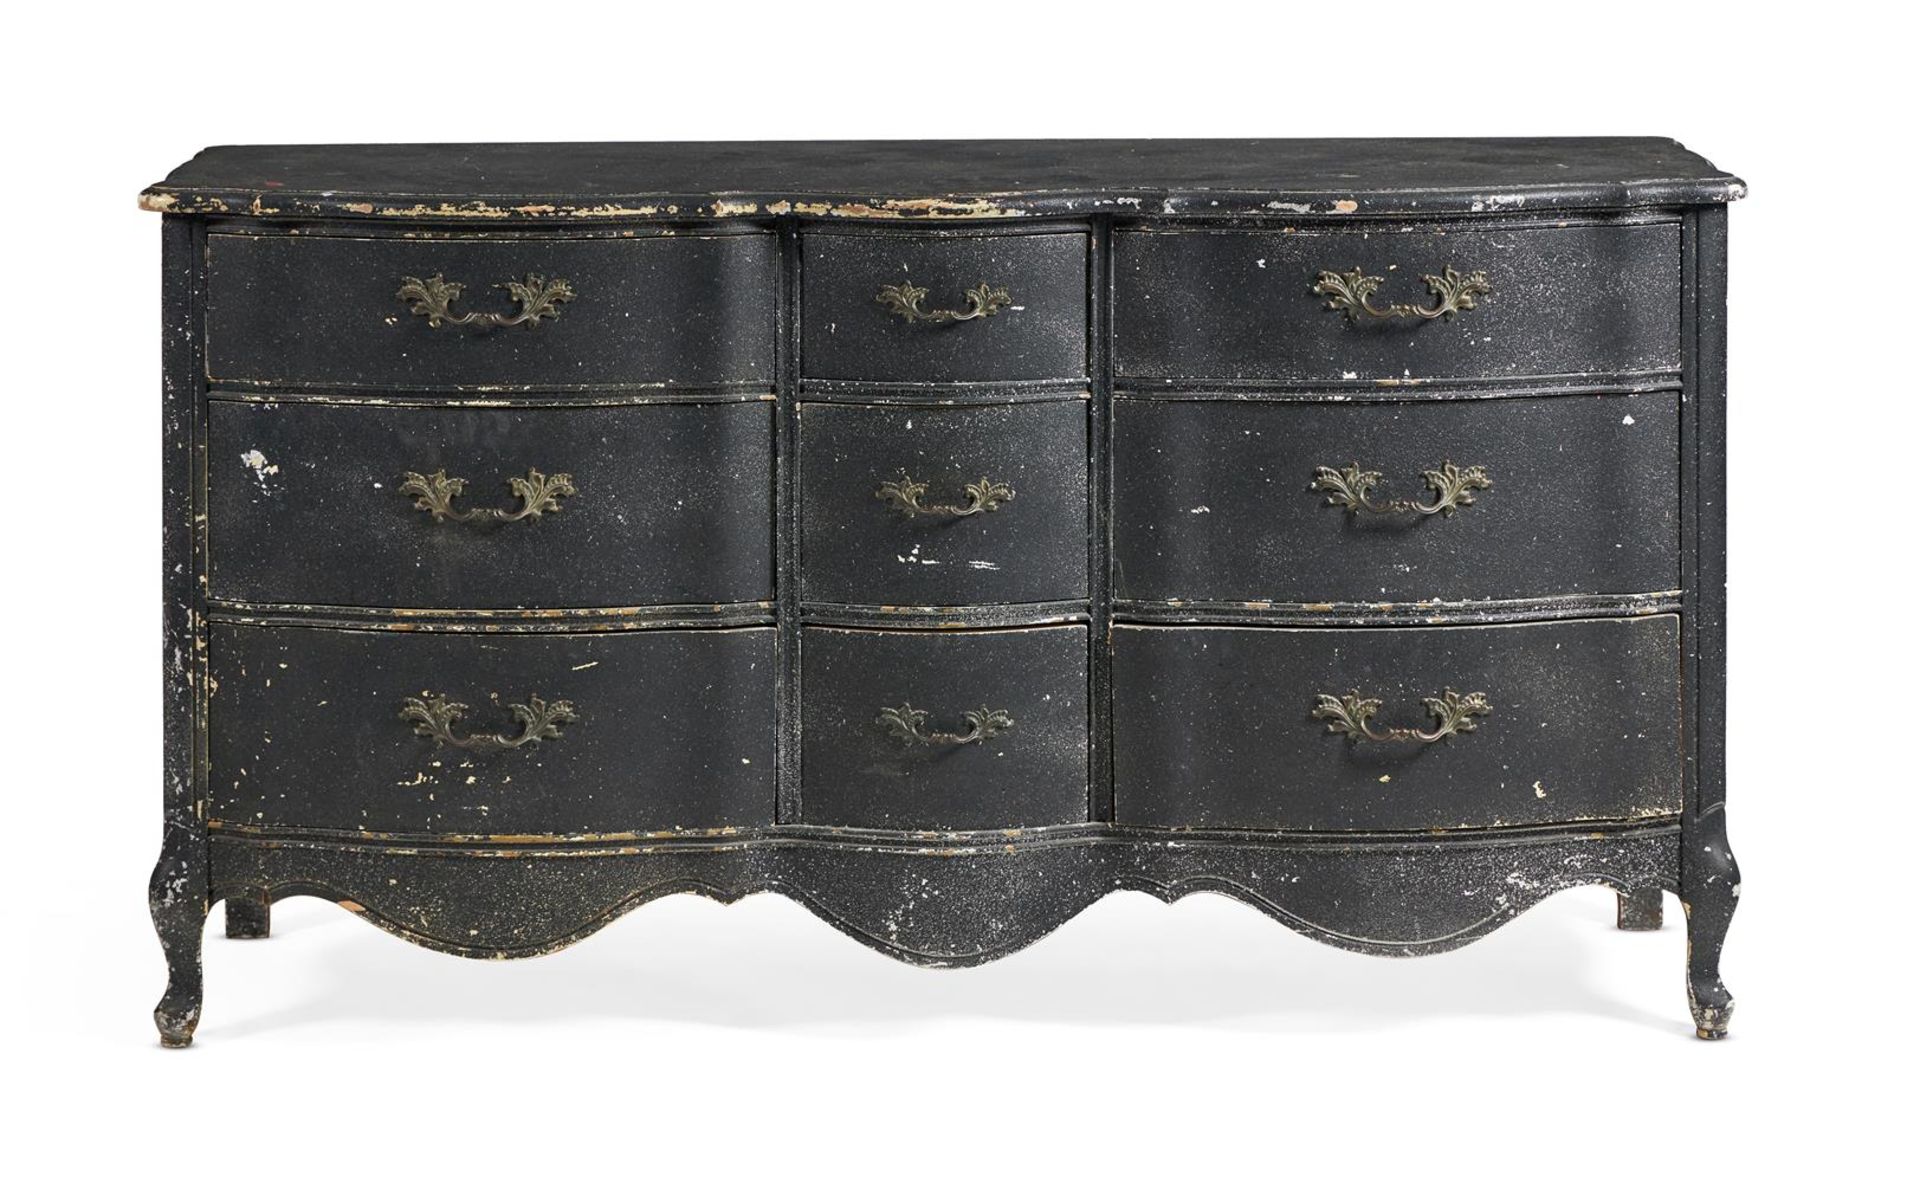 AN AMERICAN COMMODE IN LOUIS XV STYLE, LATE 20TH CENTURY